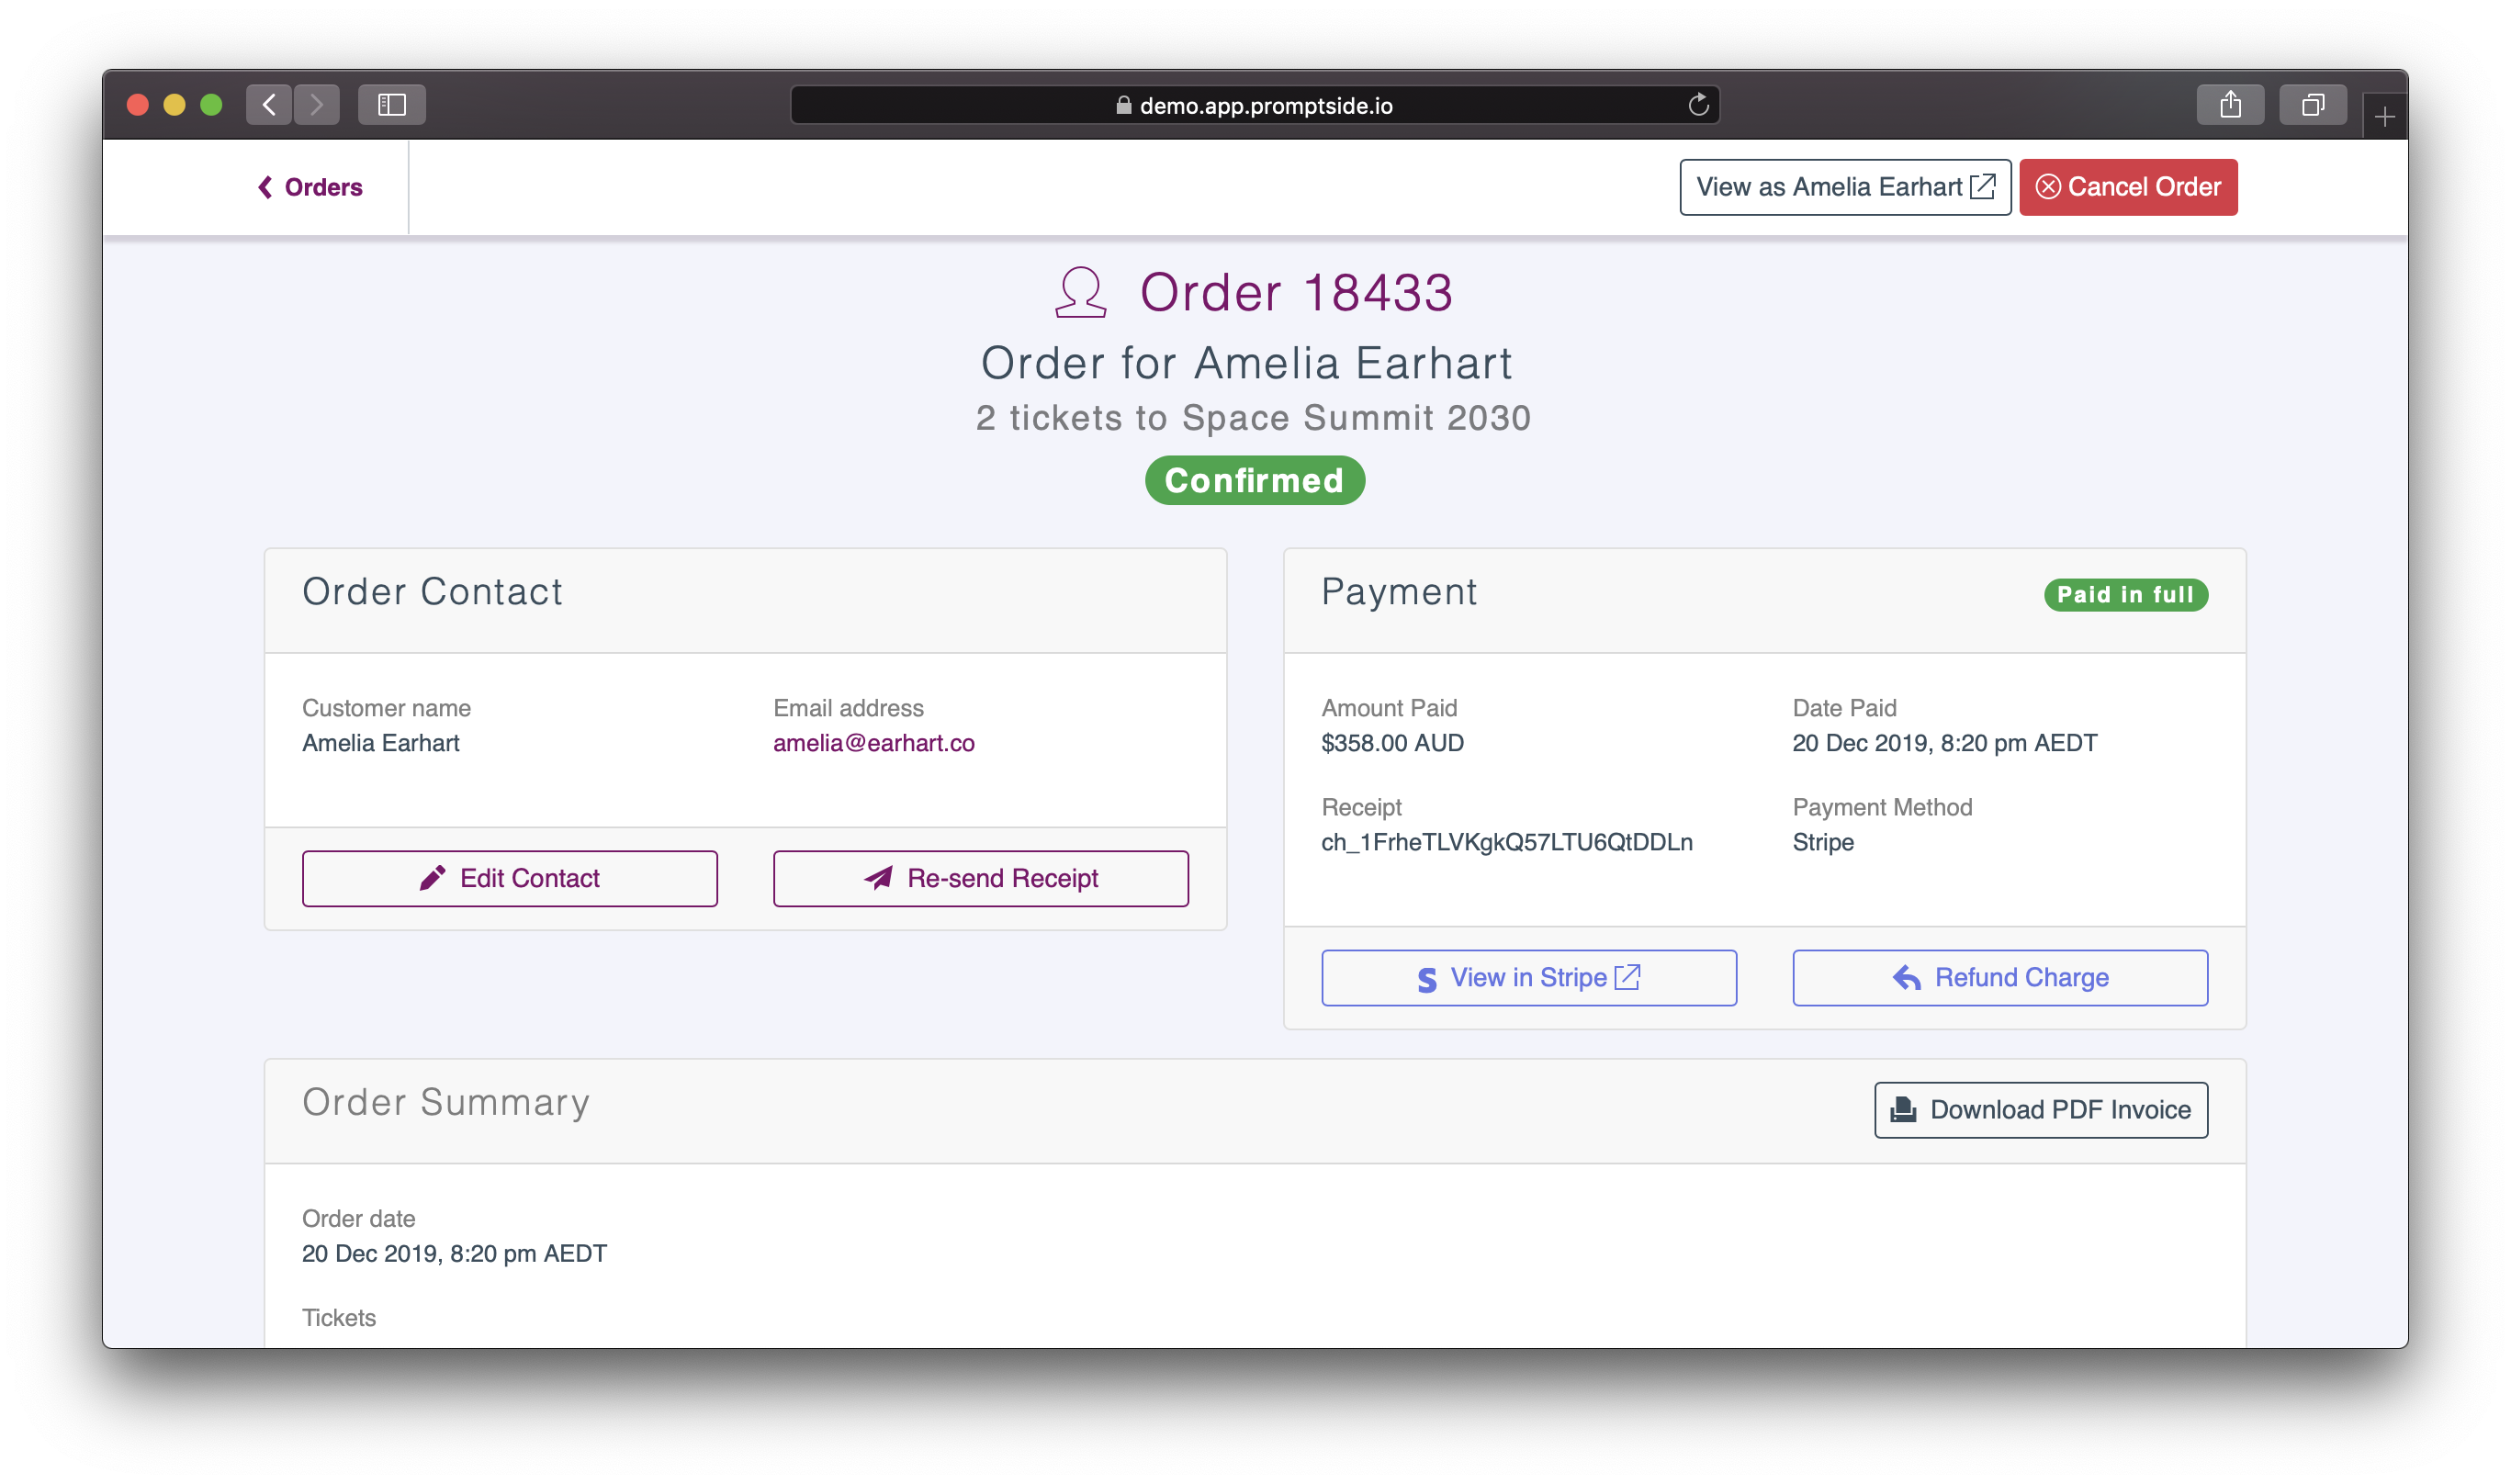 Screenshot of an administrators view of a customer order in Promptside